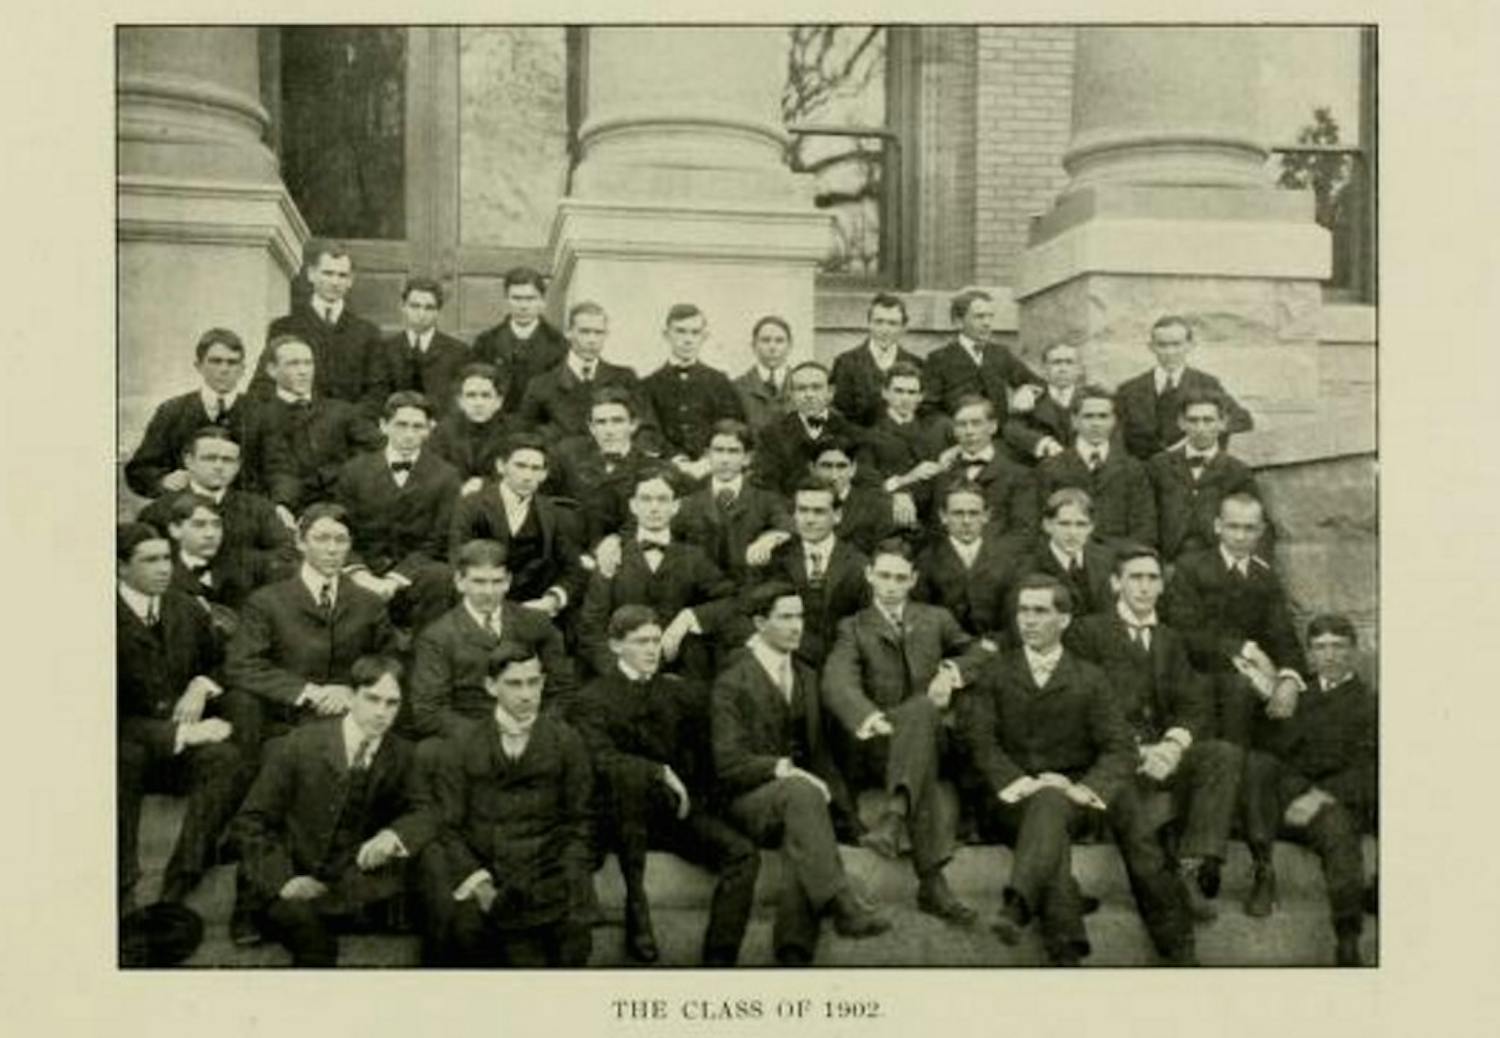 The Yackety Yack included photos to show the class of 1902. Women could enroll starting in 1897, but there are no women shown in this class photo.